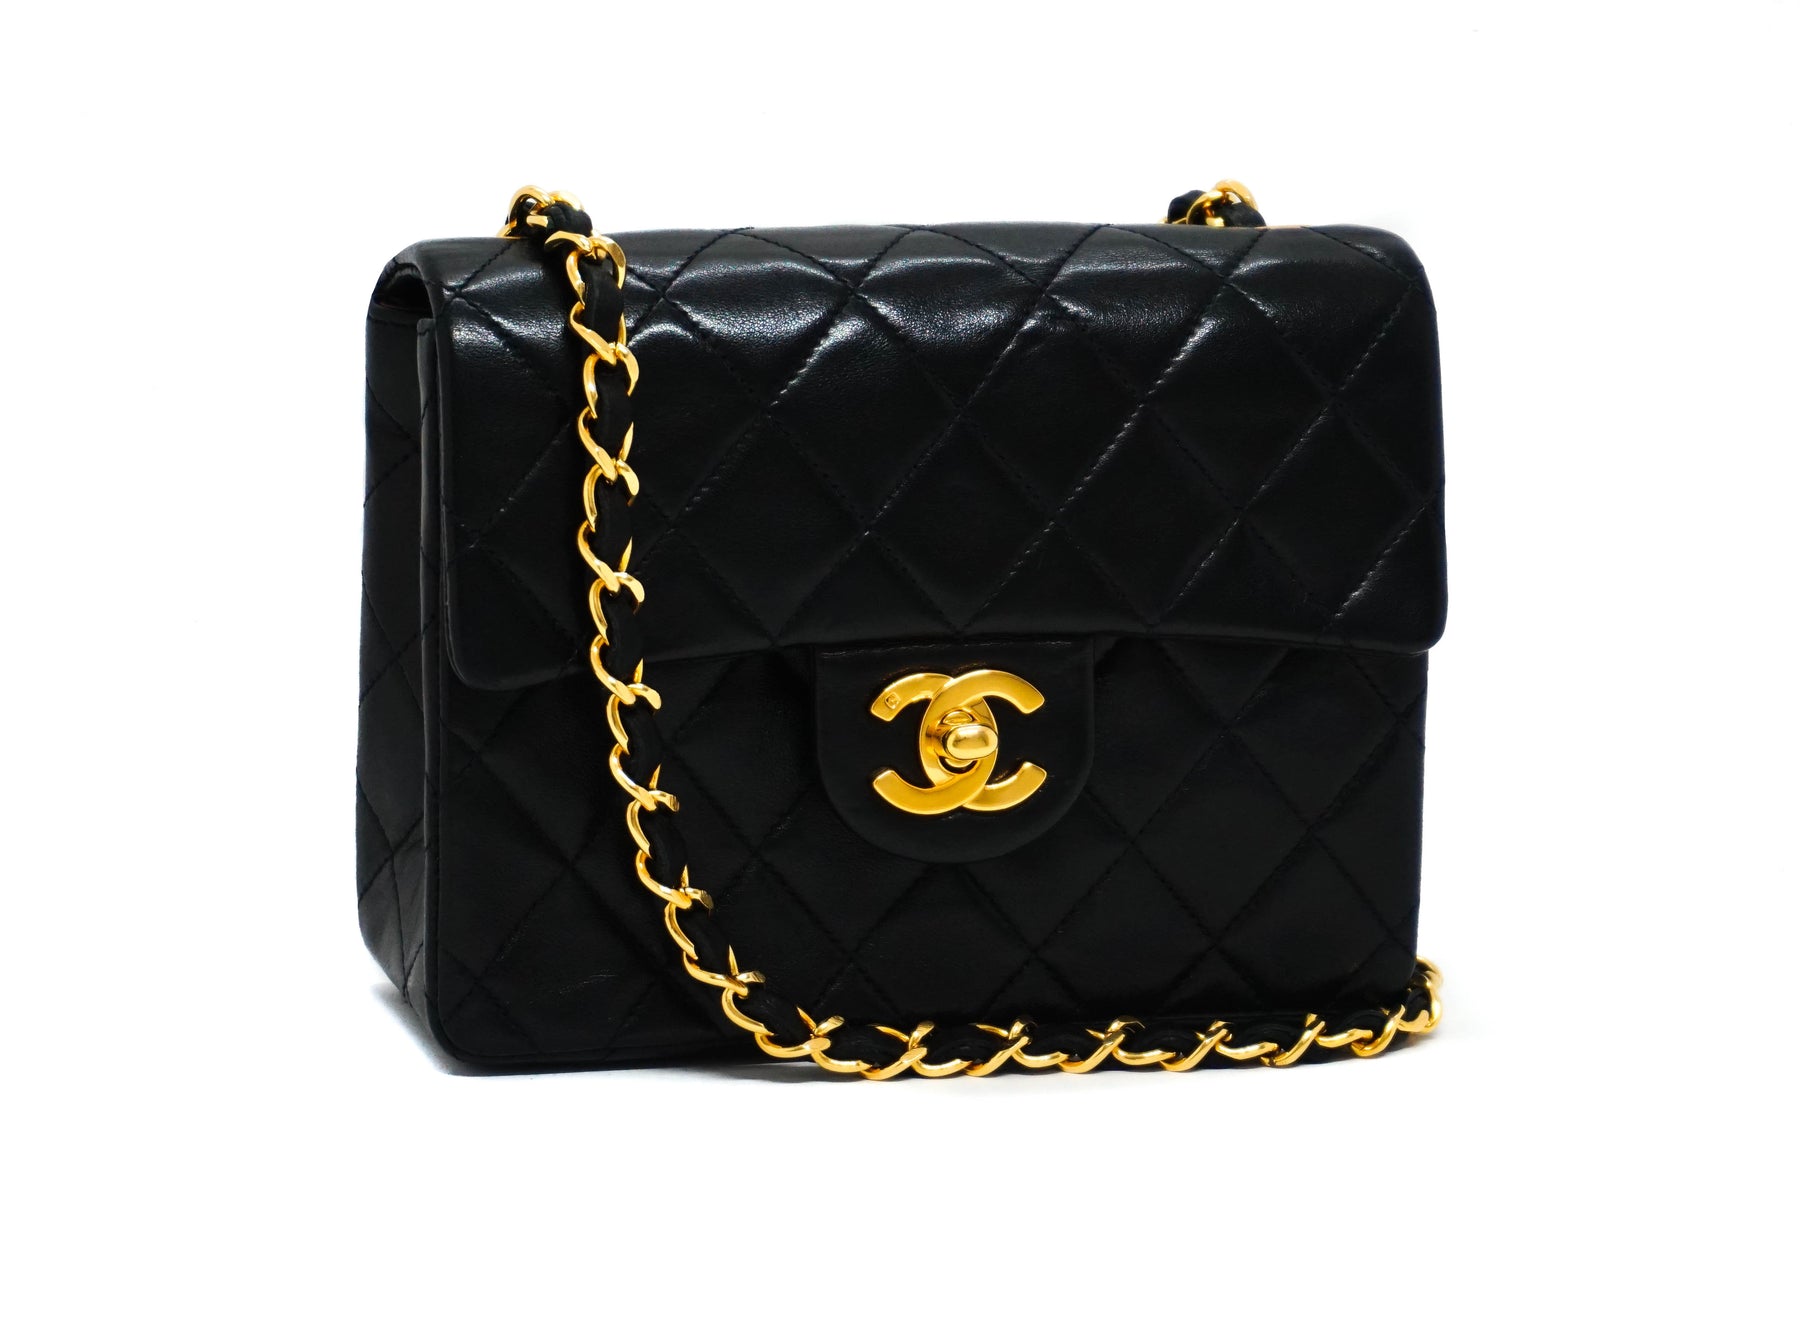 Chanel 2.55 Bags - 185 For Sale on 1stDibs  vintage 2.55 chanel bag,  reissue 2.55 chanel, chanel vintage 2.55